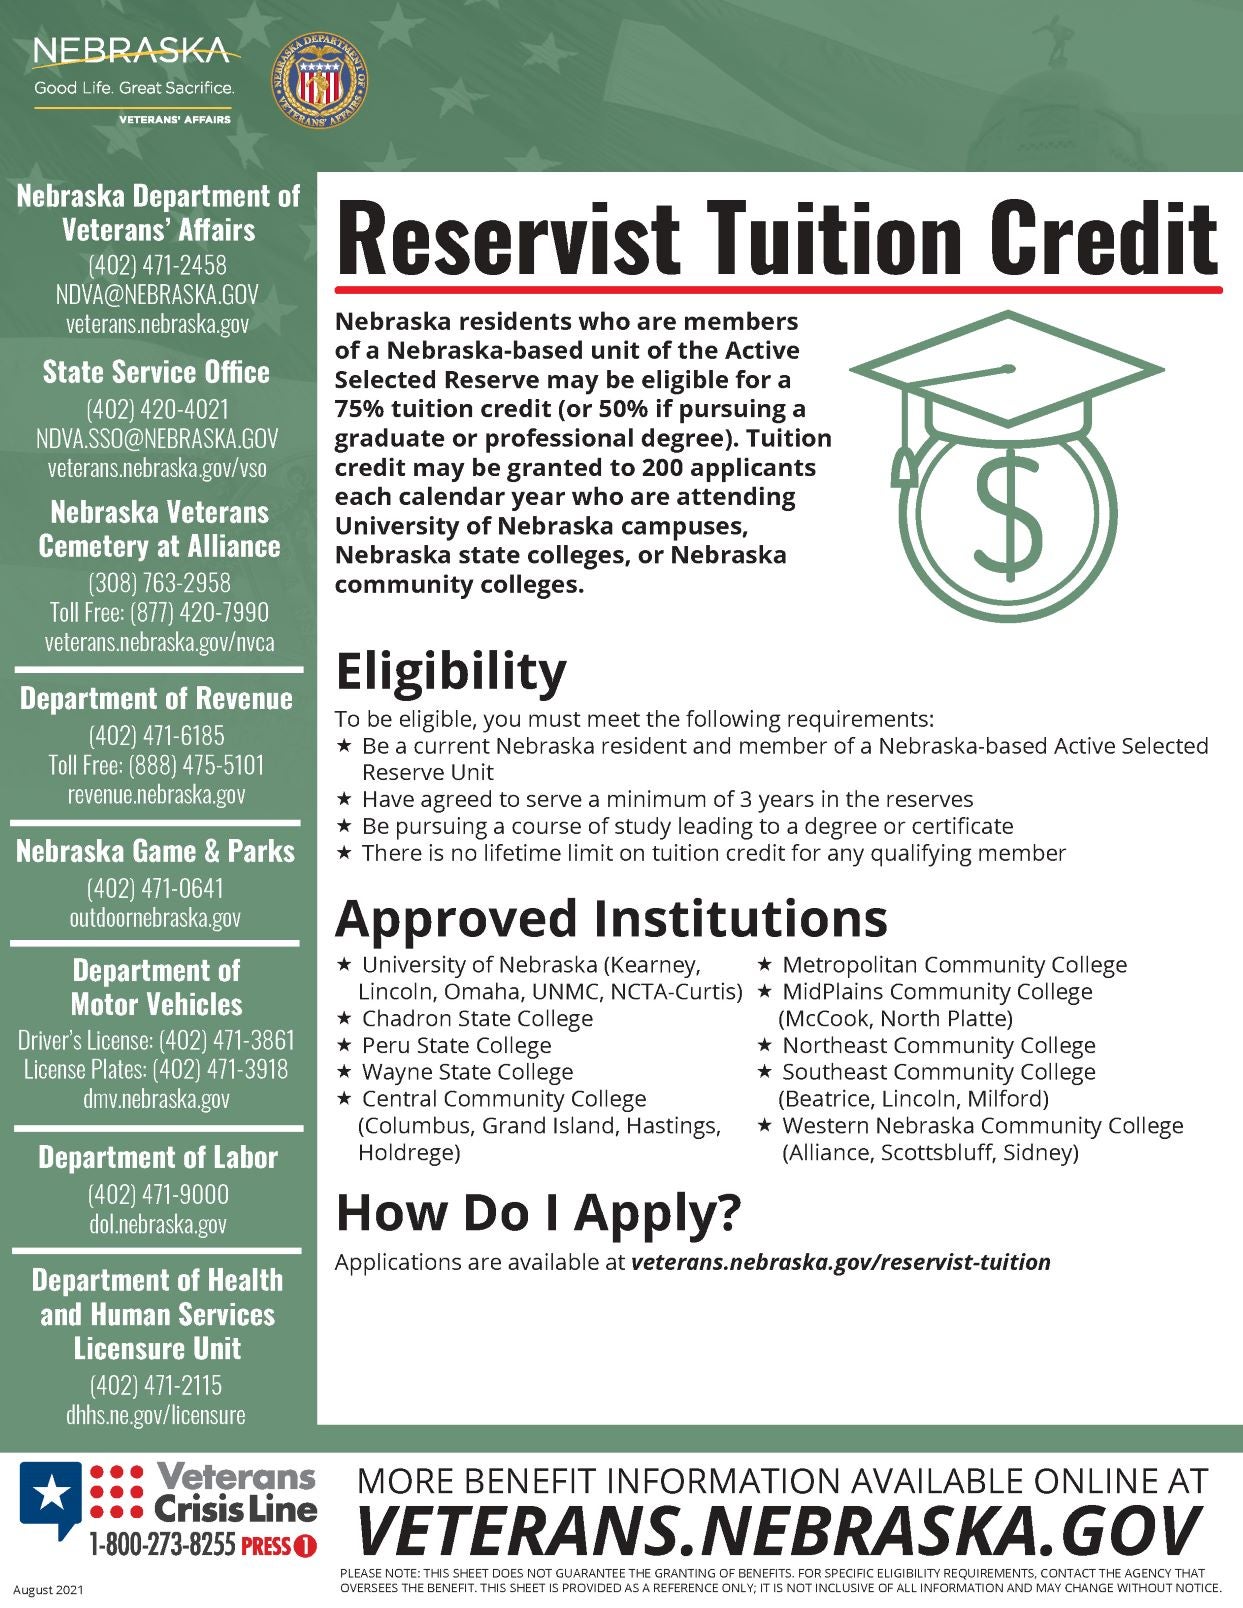 Reservist Tuition Credit info sheet